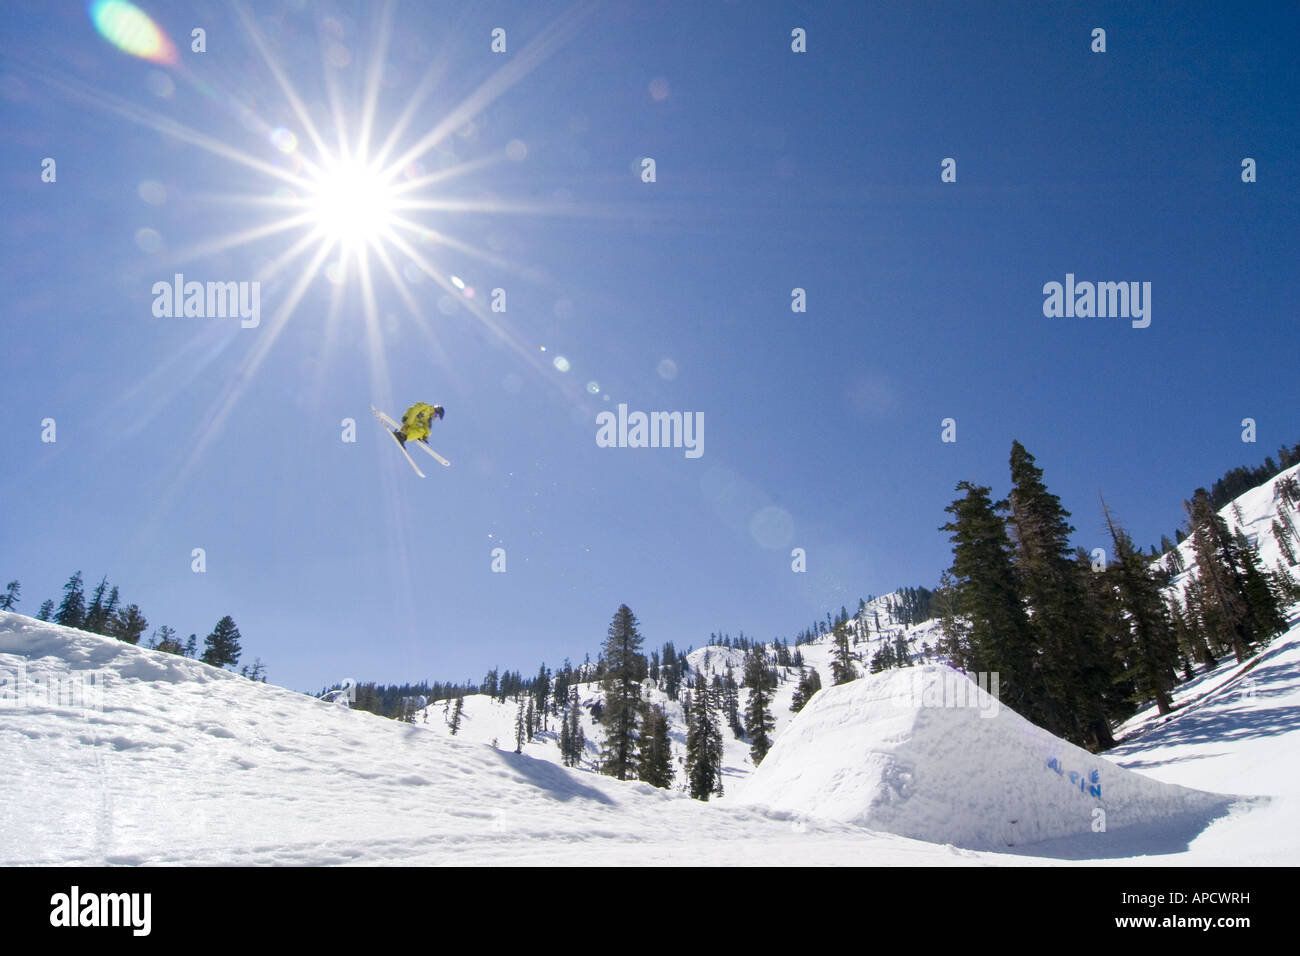 A skier jumping off a huge jump at Alpine Meadows in California Stock Photo